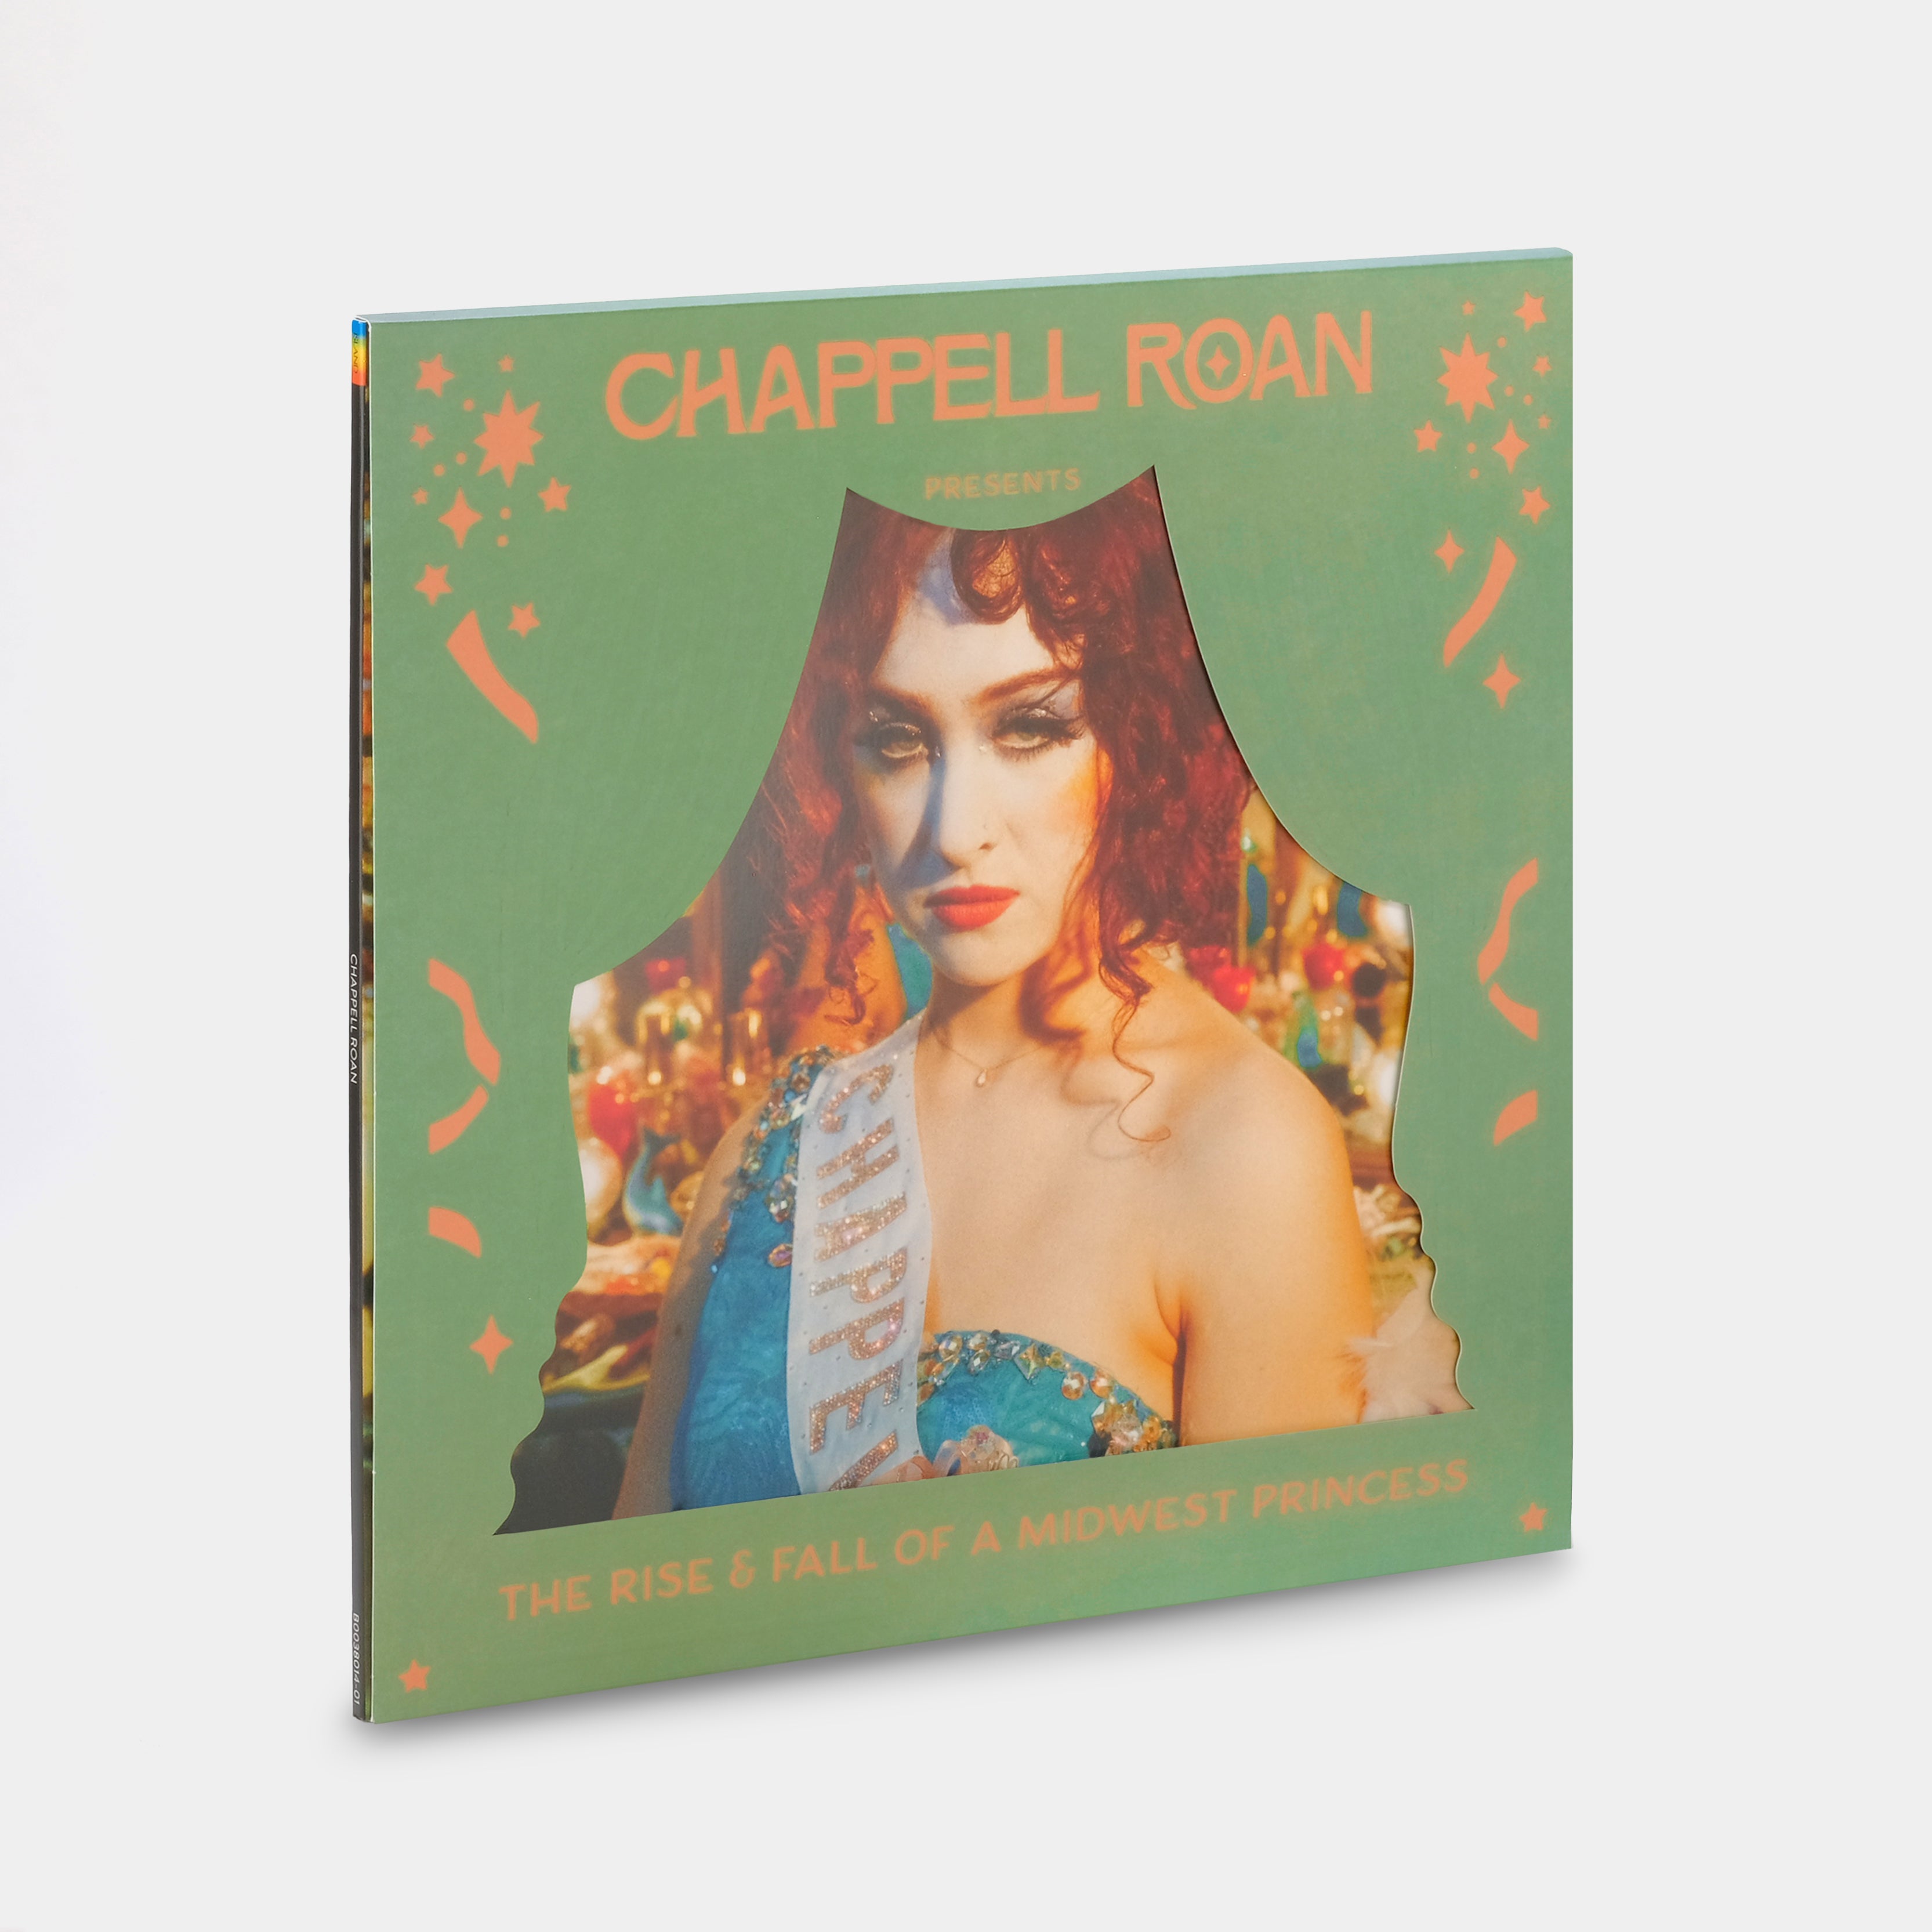 Chappell Roan - The Rise & Fall Of A Midwest Princess 2xLP Vinyl Record